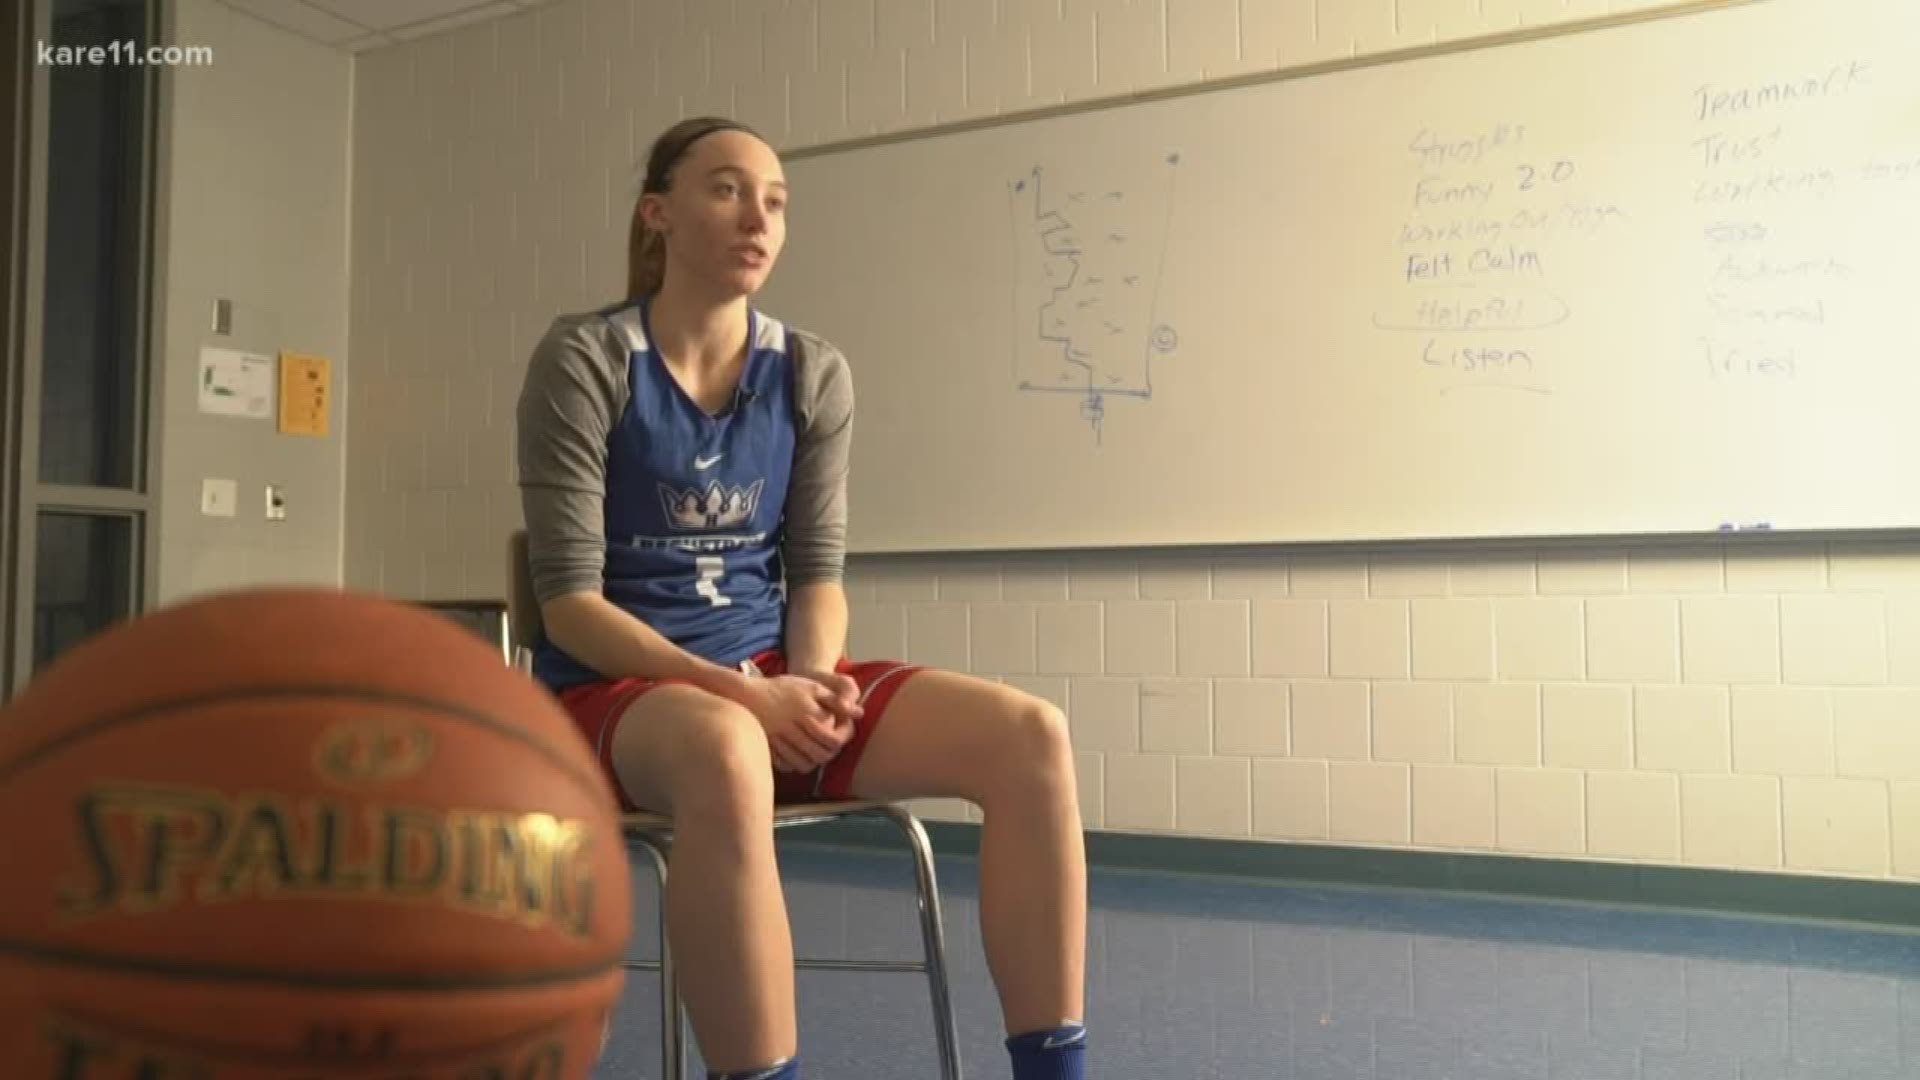 The Hopkins High School senior talks about being the top girls basketball recruit in the country.